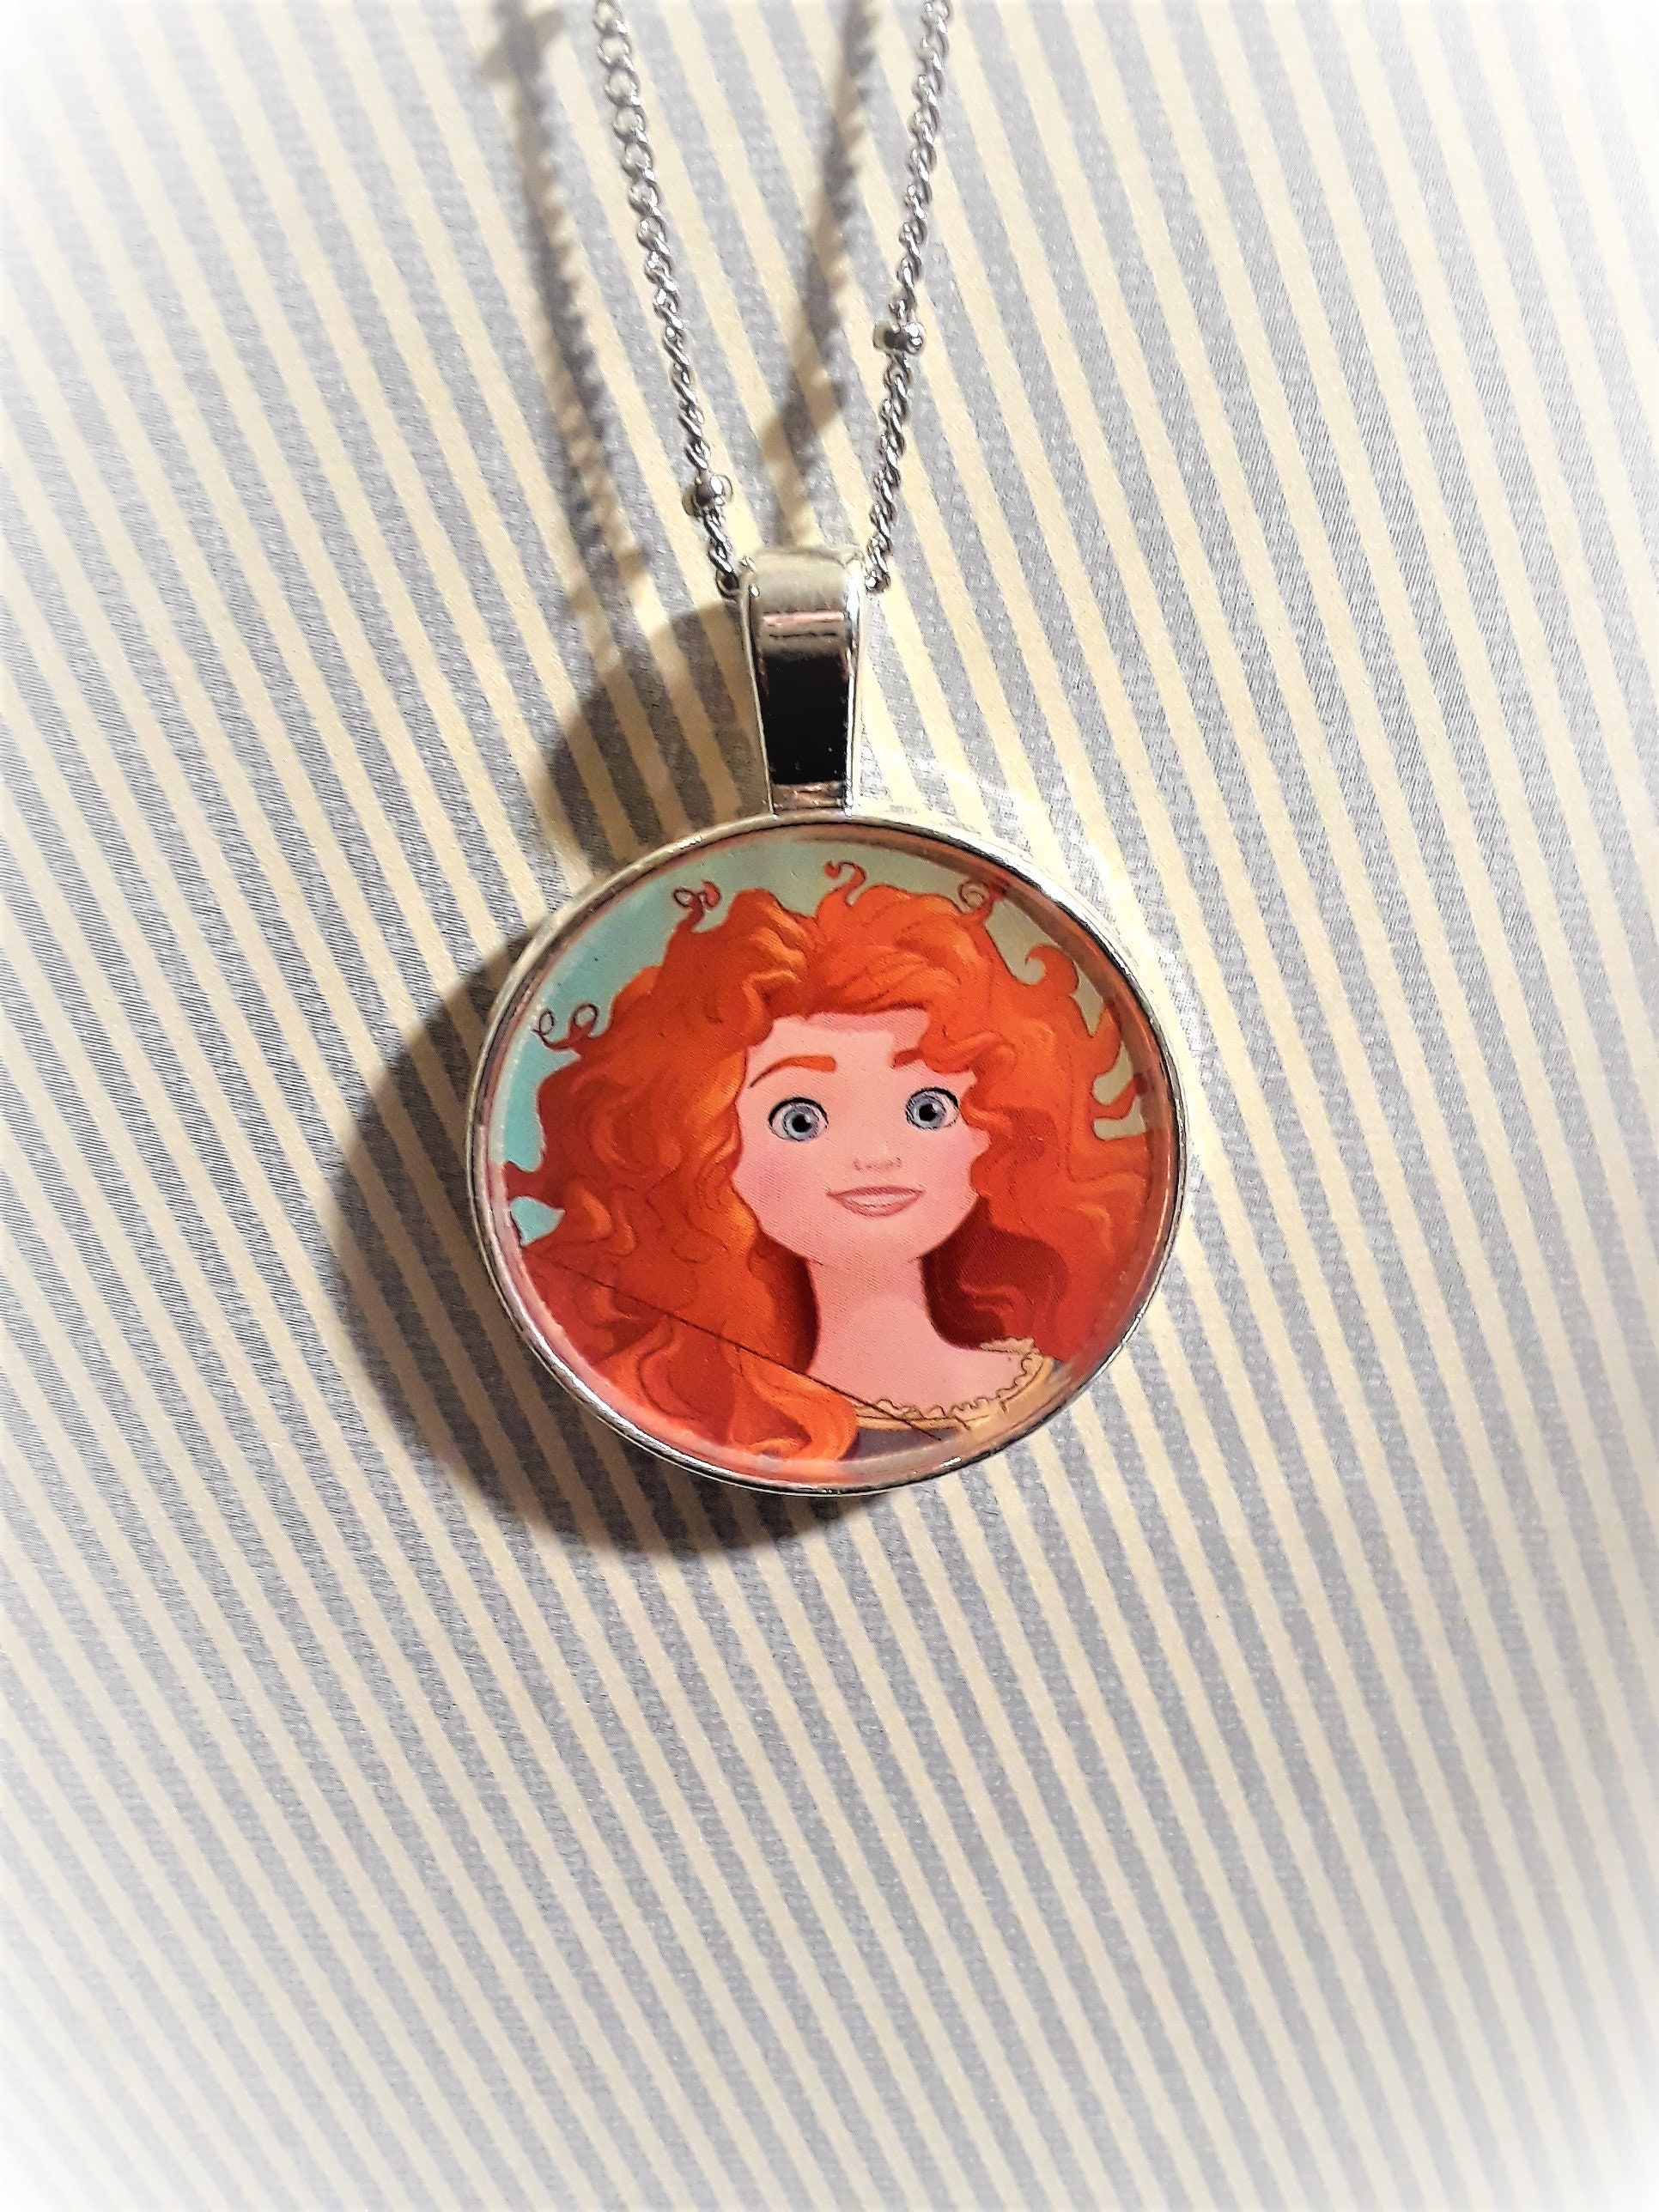 Buy Brave Merida Inspired Bow and Arrow Charm Necklace Online in India -  Etsy